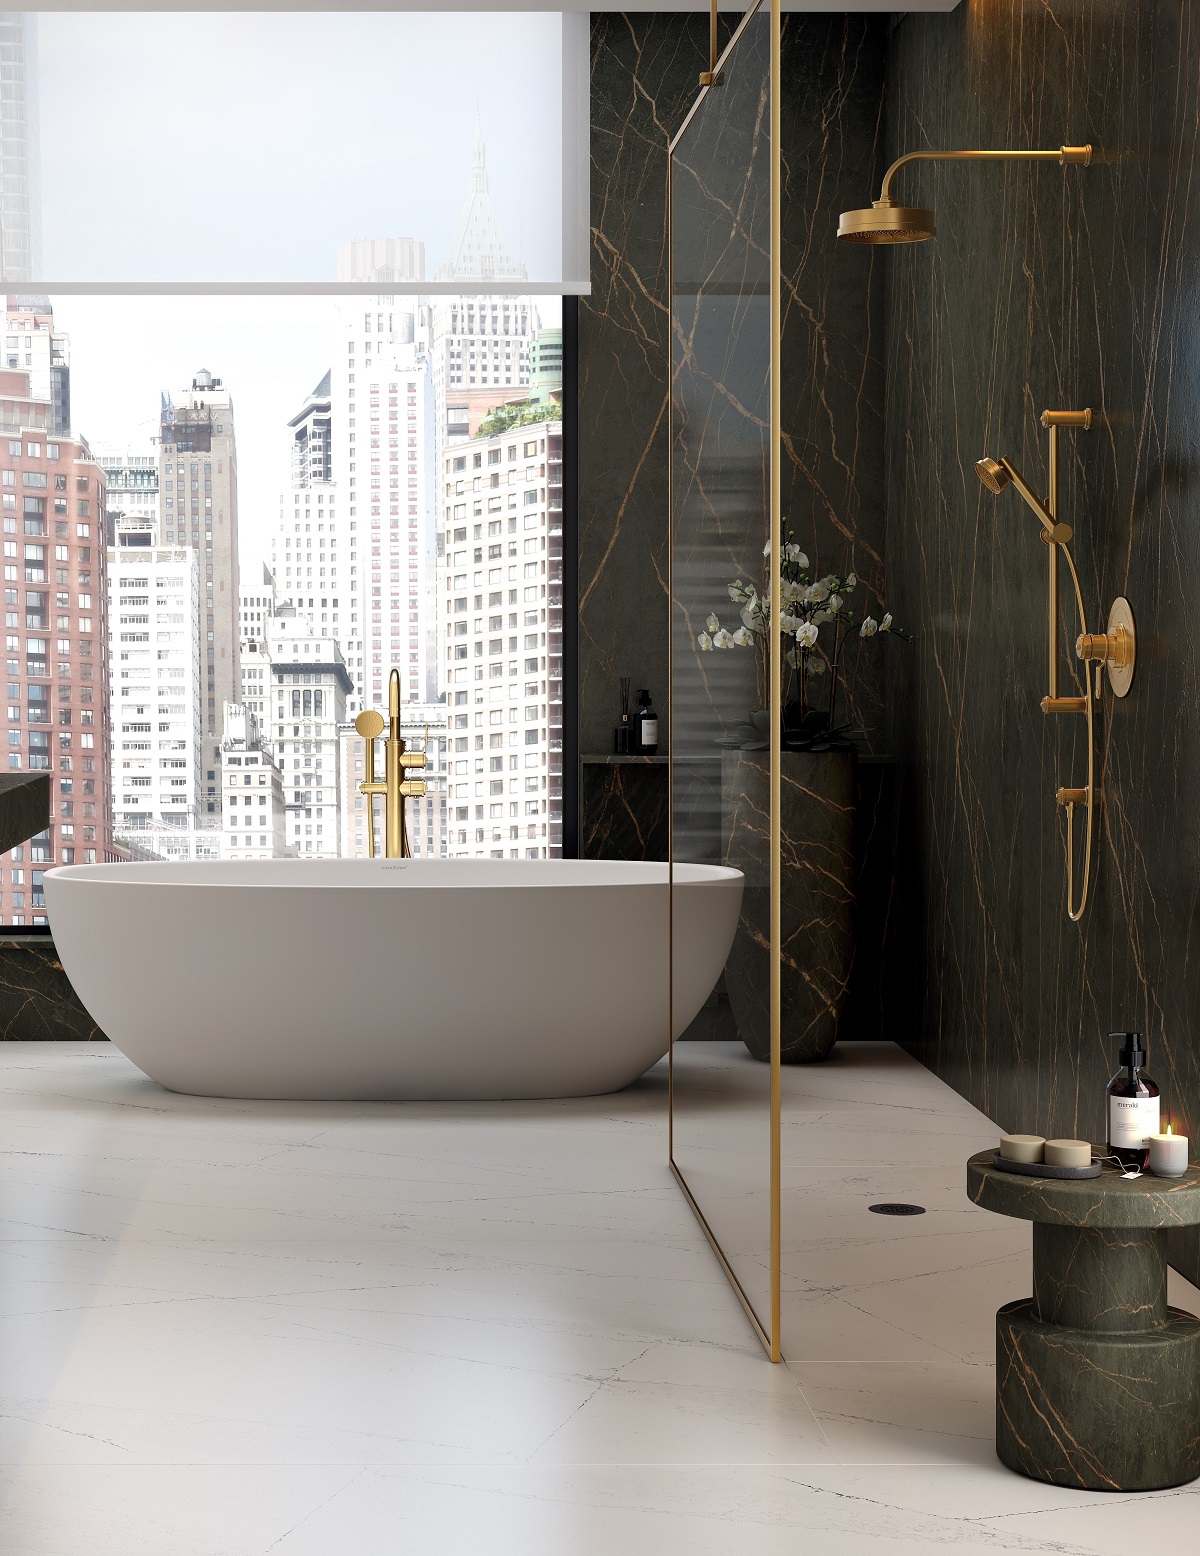 white freestanding bath in front of window overlooking city skyline. Brass finish Perrin & Rowe shower in foreground